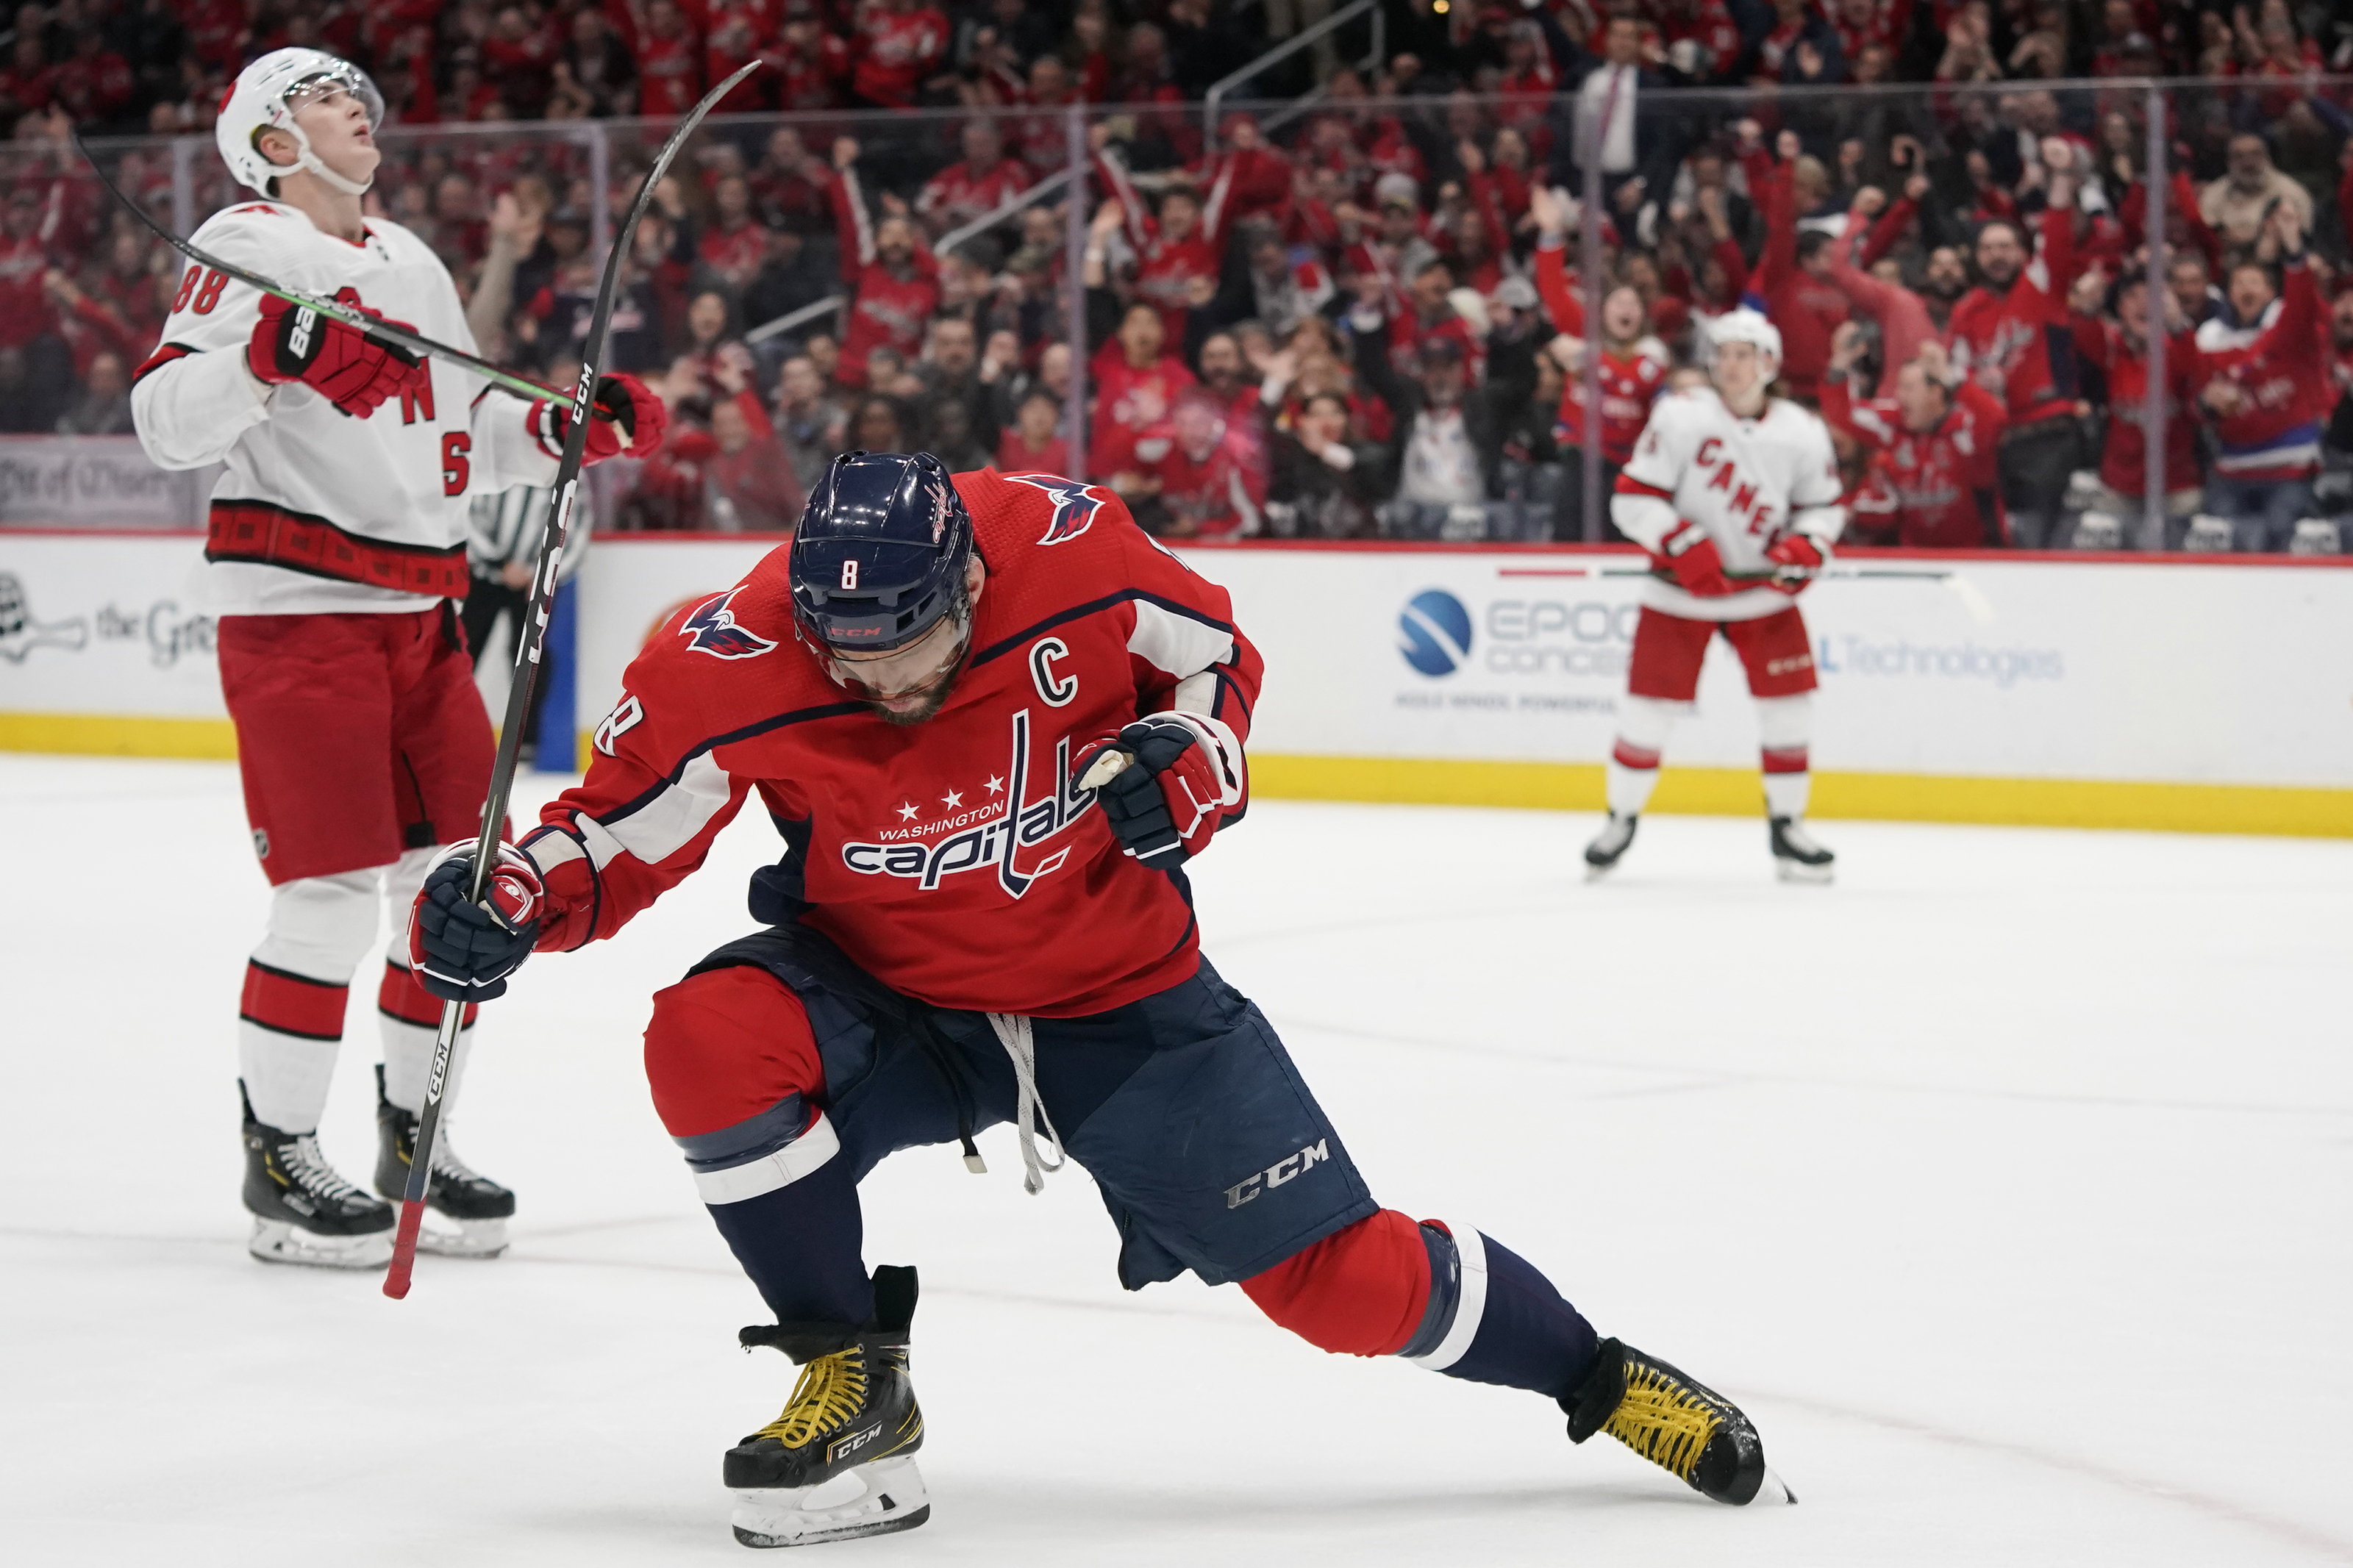 Alex Ovechkin made his Capitals debut 10 years ago - The Washington Post